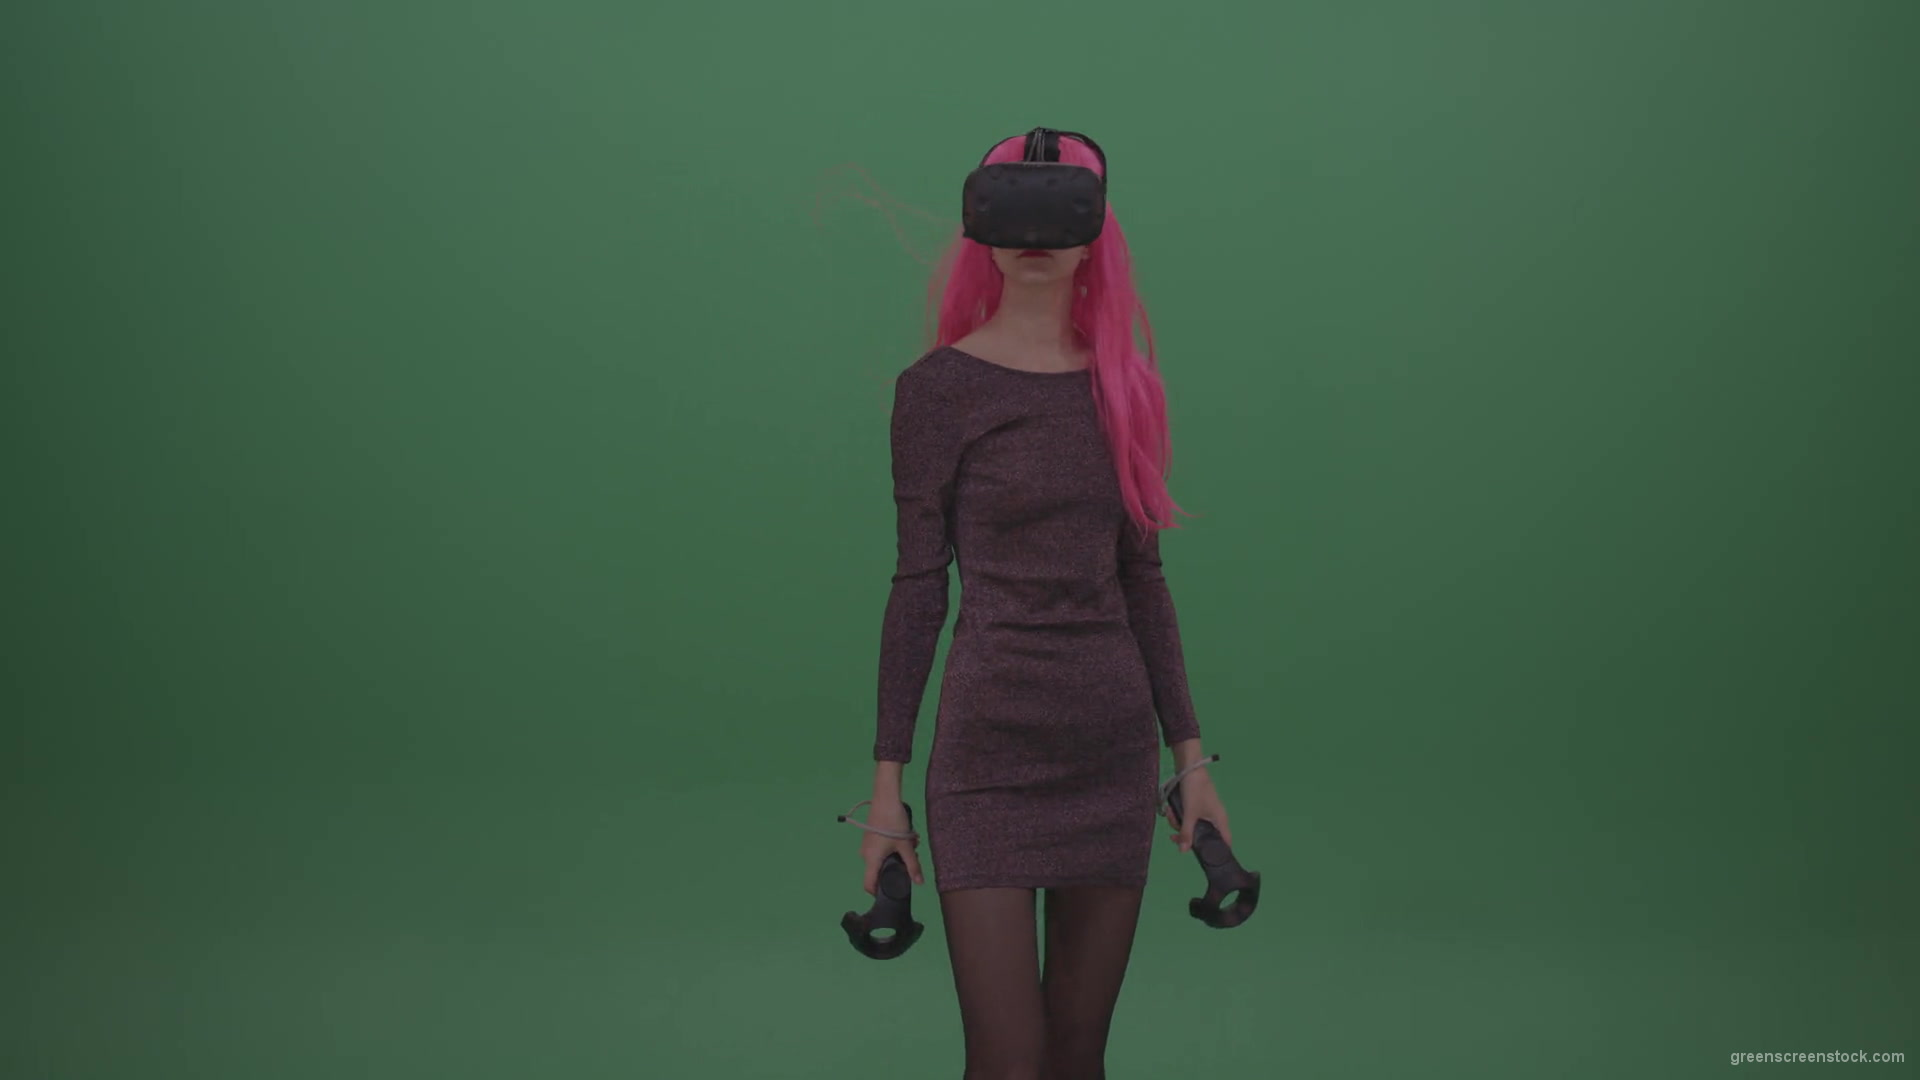 Pink_Hair_Young_Japanese_Anime_Rock_Girl_Shooting_Enemies_In_Virtual_Reality_Game_Heavy_Wind_Weather_Green_Screen_Wall_Background-1920_009 Green Screen Stock